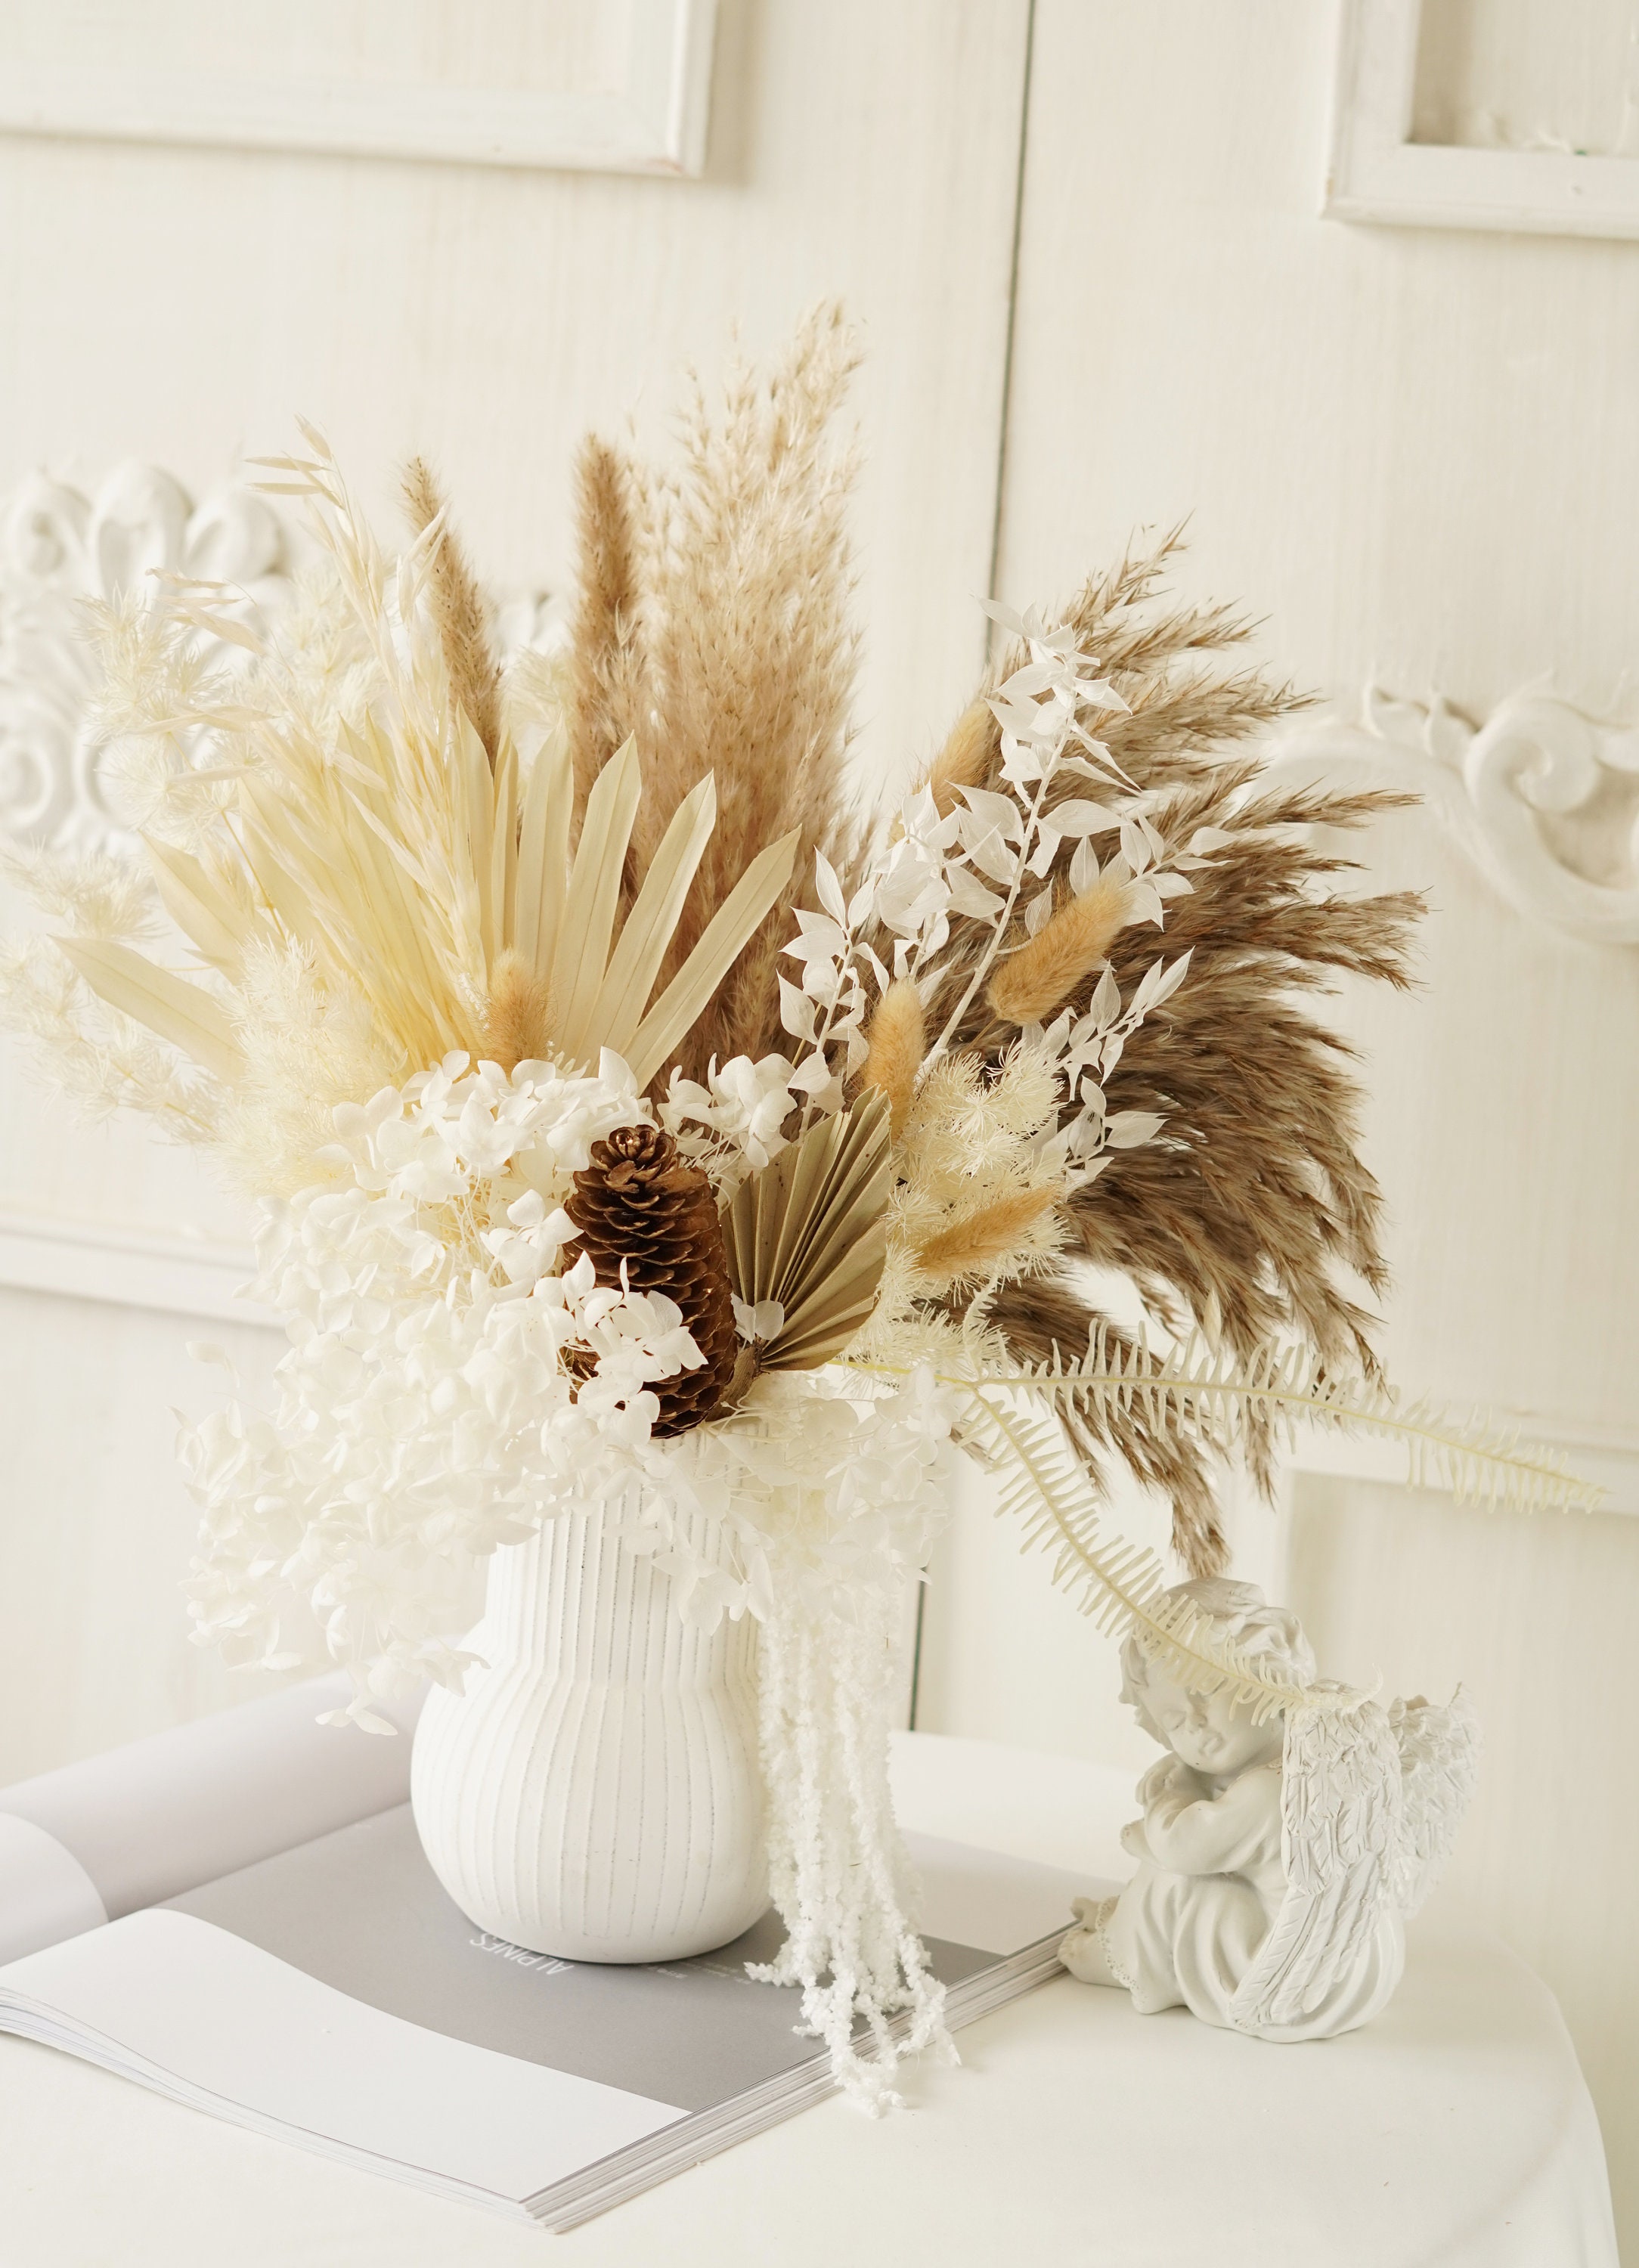 How To Make A Simple Dried Flower Arrangement 